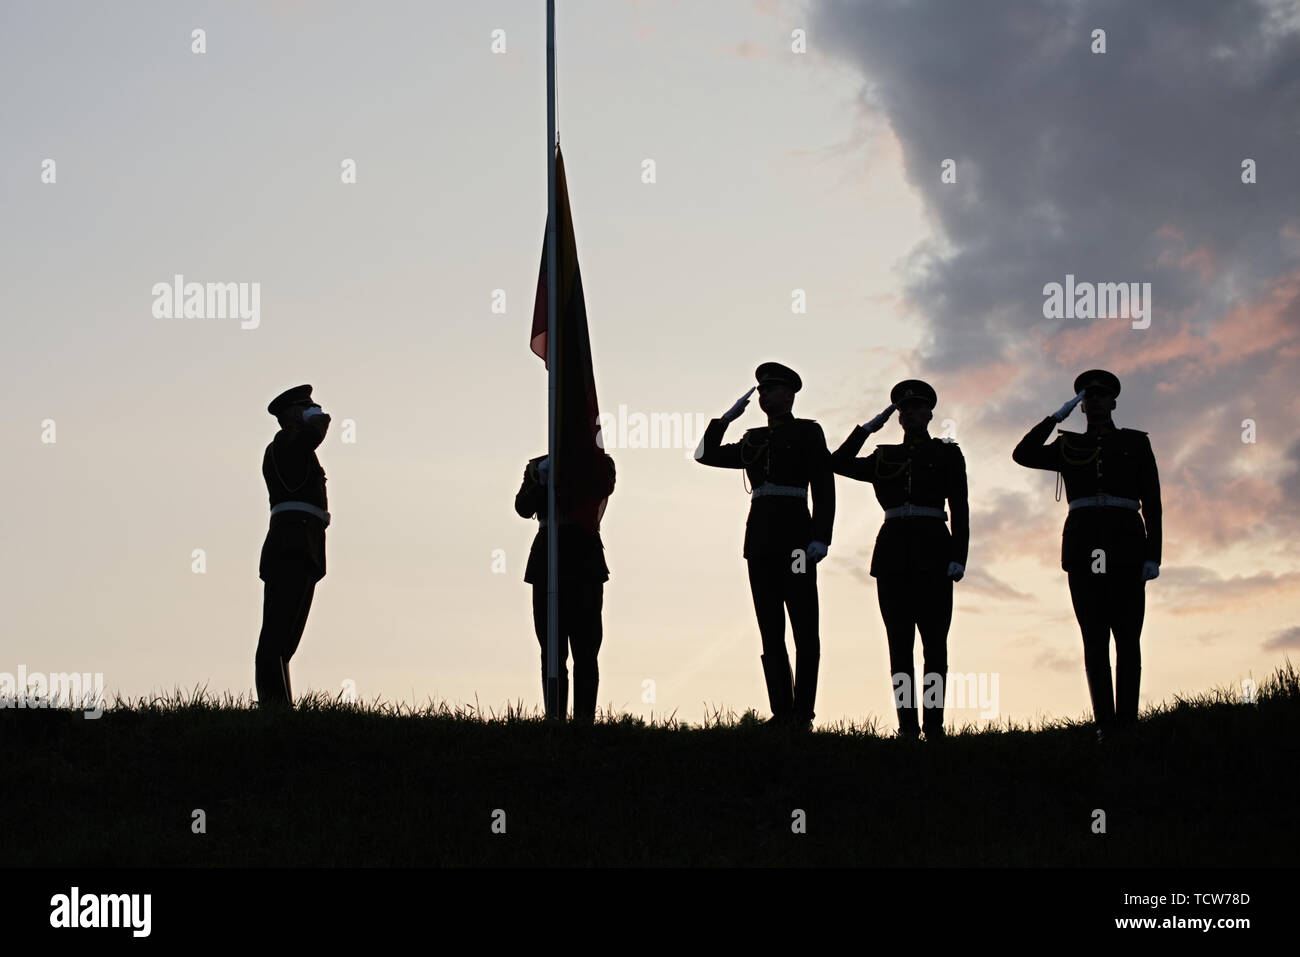 Soldiers Raising The Lithuanian Flag At evening Sunset Stock Photo